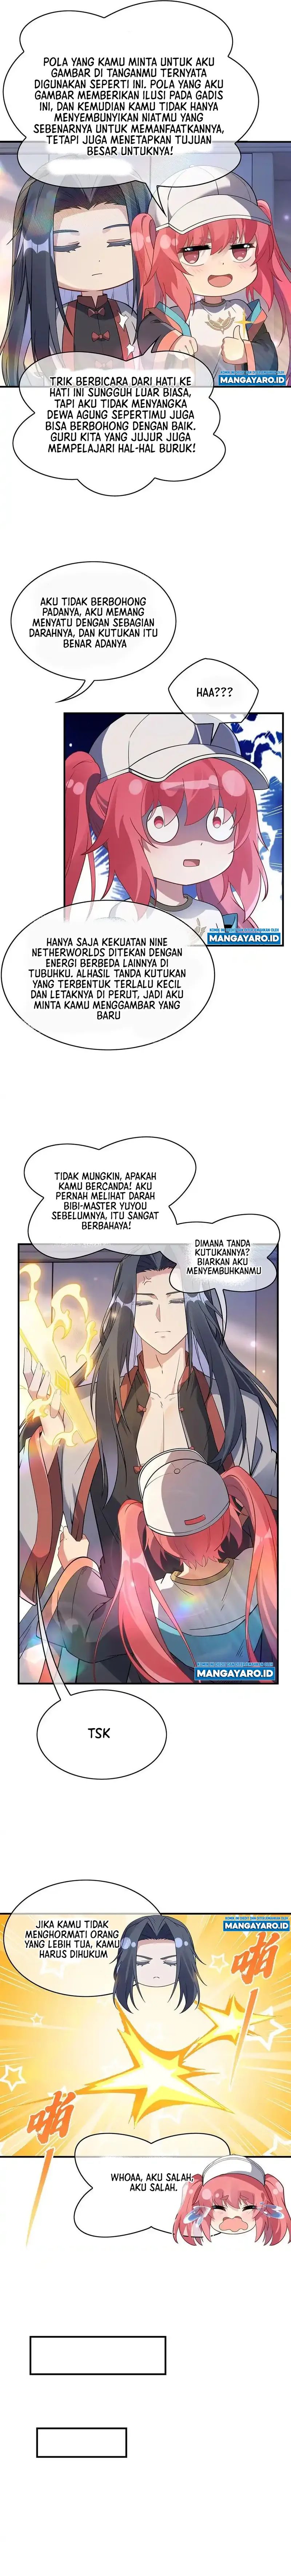 Dilarang COPAS - situs resmi www.mangacanblog.com - Komik my female apprentices are all big shots from the future 267 - chapter 267 268 Indonesia my female apprentices are all big shots from the future 267 - chapter 267 Terbaru 4|Baca Manga Komik Indonesia|Mangacan